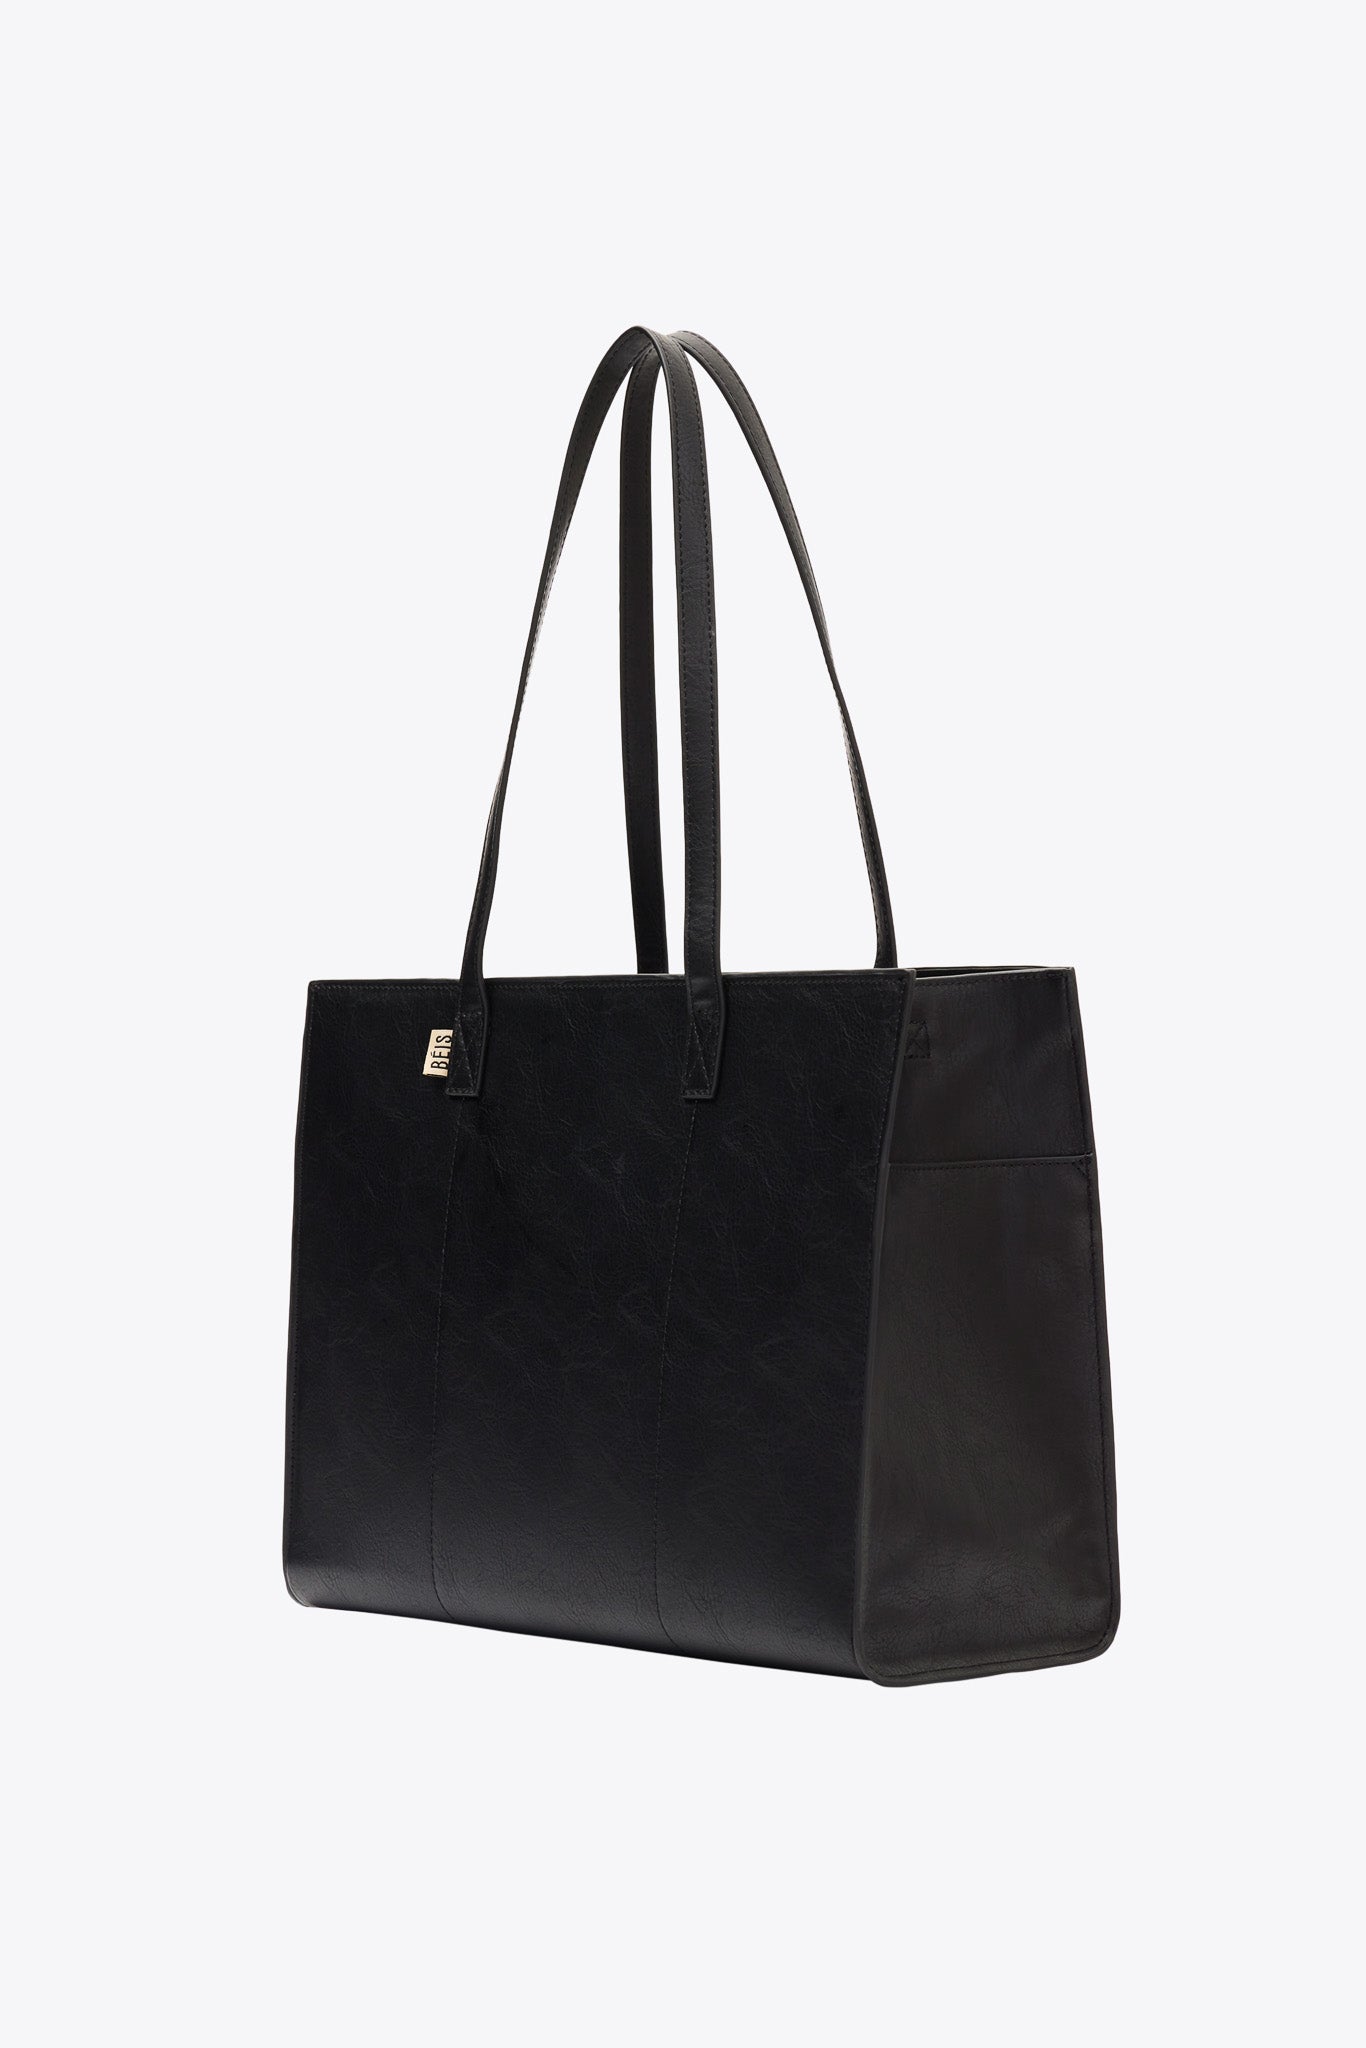 The Work Tote in Black